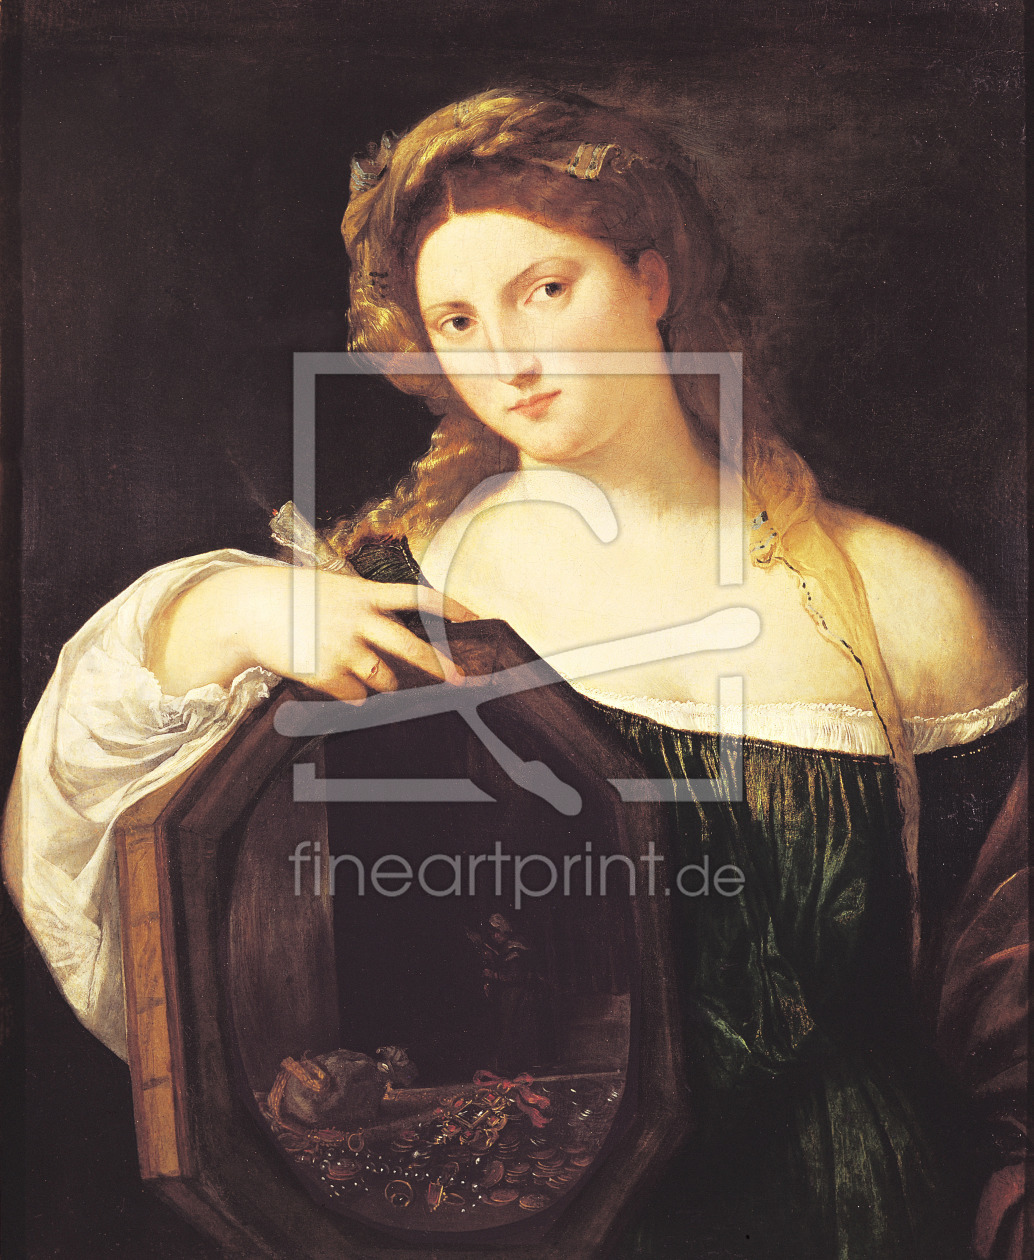 Bild-Nr.: 31001379 Allegory of Vanity, or Young Woman with a Mirror, c.1515 erstellt von Vecellio, Tiziano